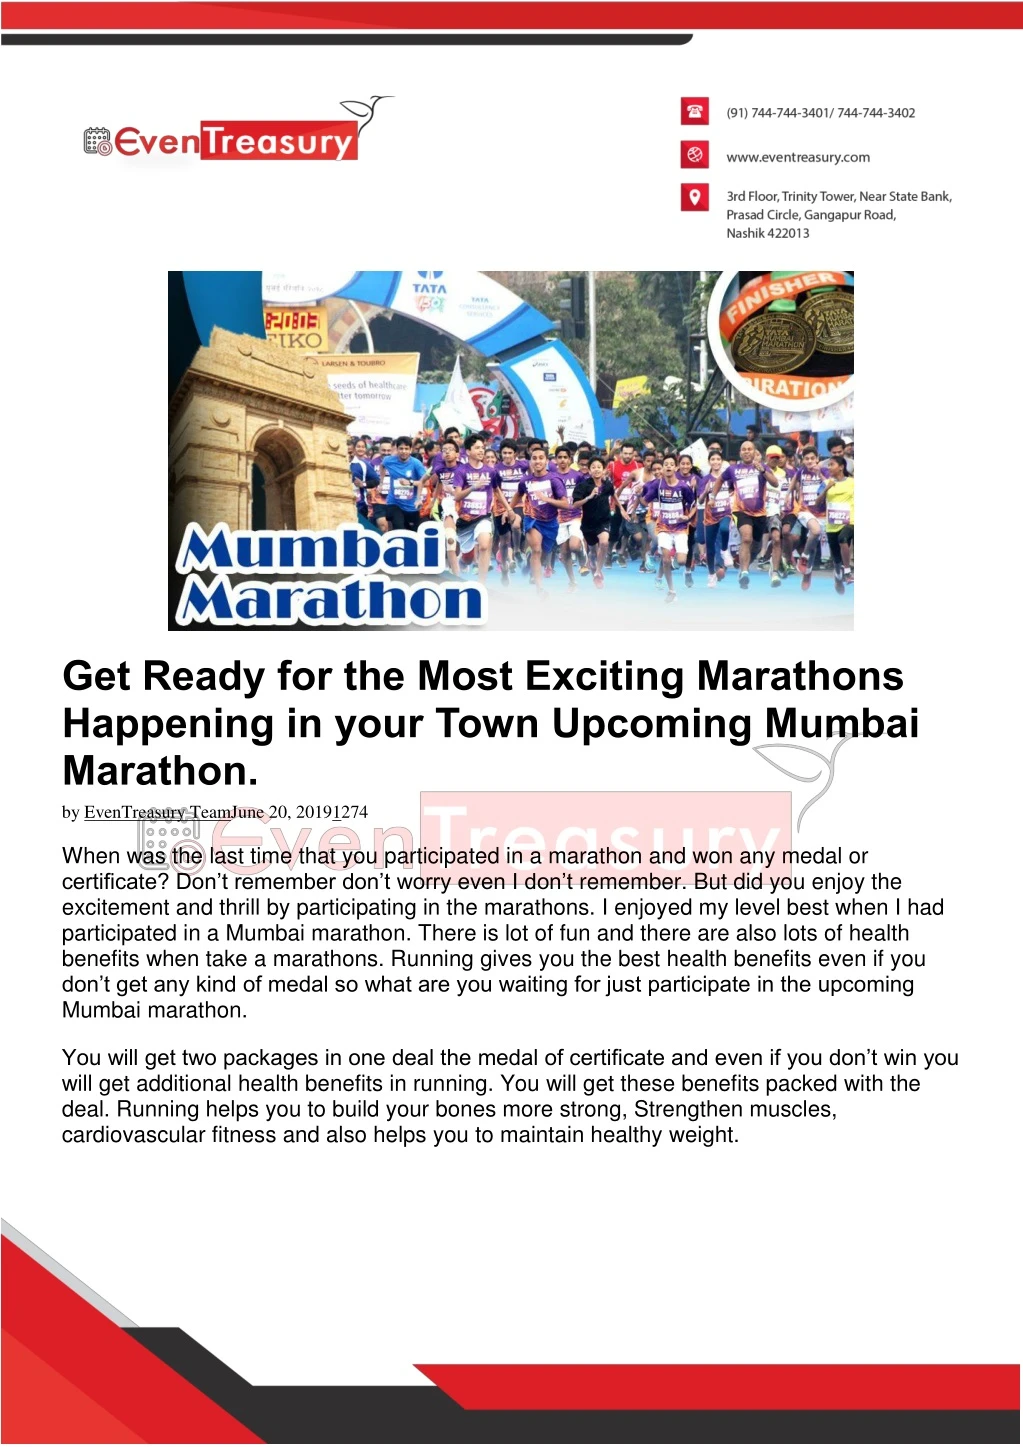 get ready for the most exciting marathons